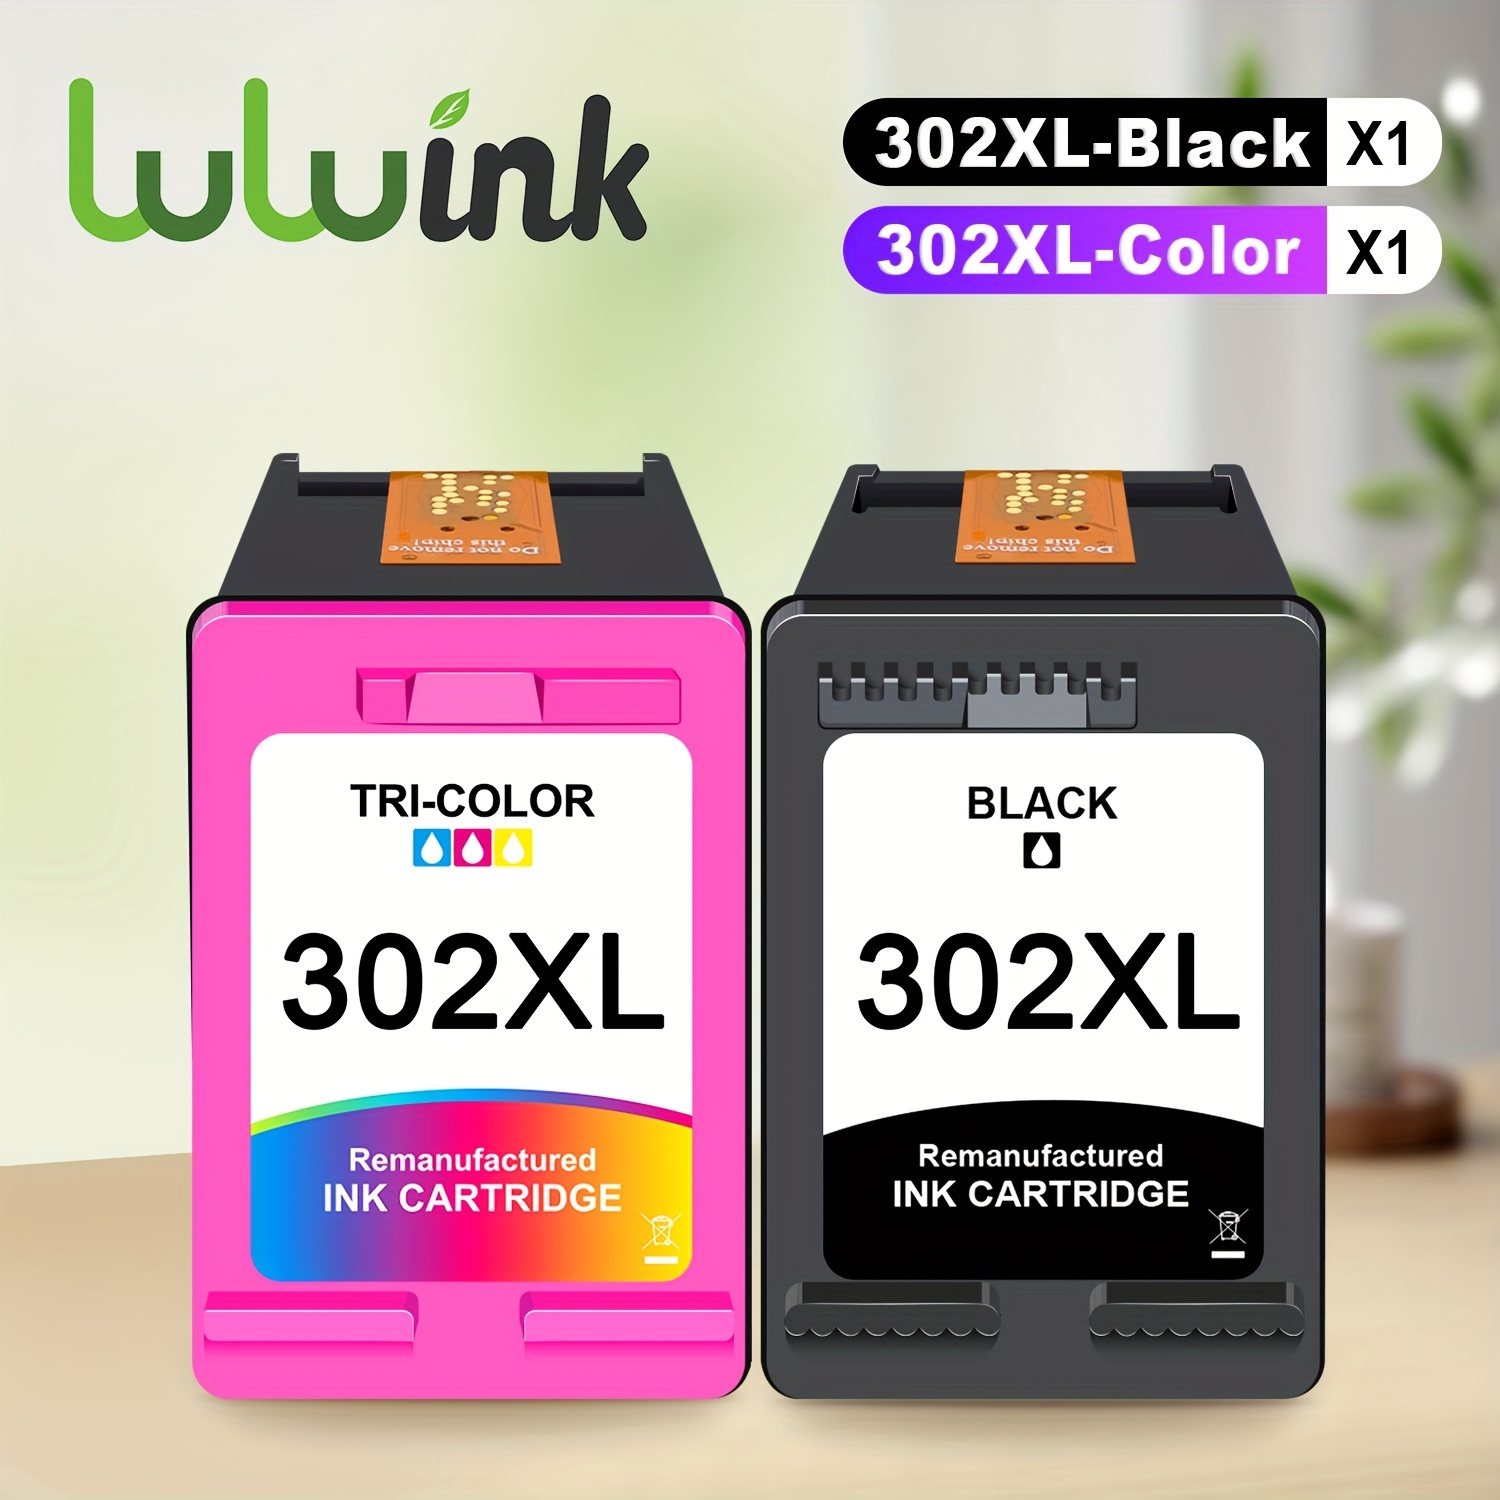 

High-yield 302xl Remanufactured Ink Cartridges - Compatible With Hp Deskjet & Officejet Series (1110, 1111, 1112, Envy 4510, 4511, 4512, 3830, 3831, 3832, 4650, 4652, 4654) - Black & Tri-color Options